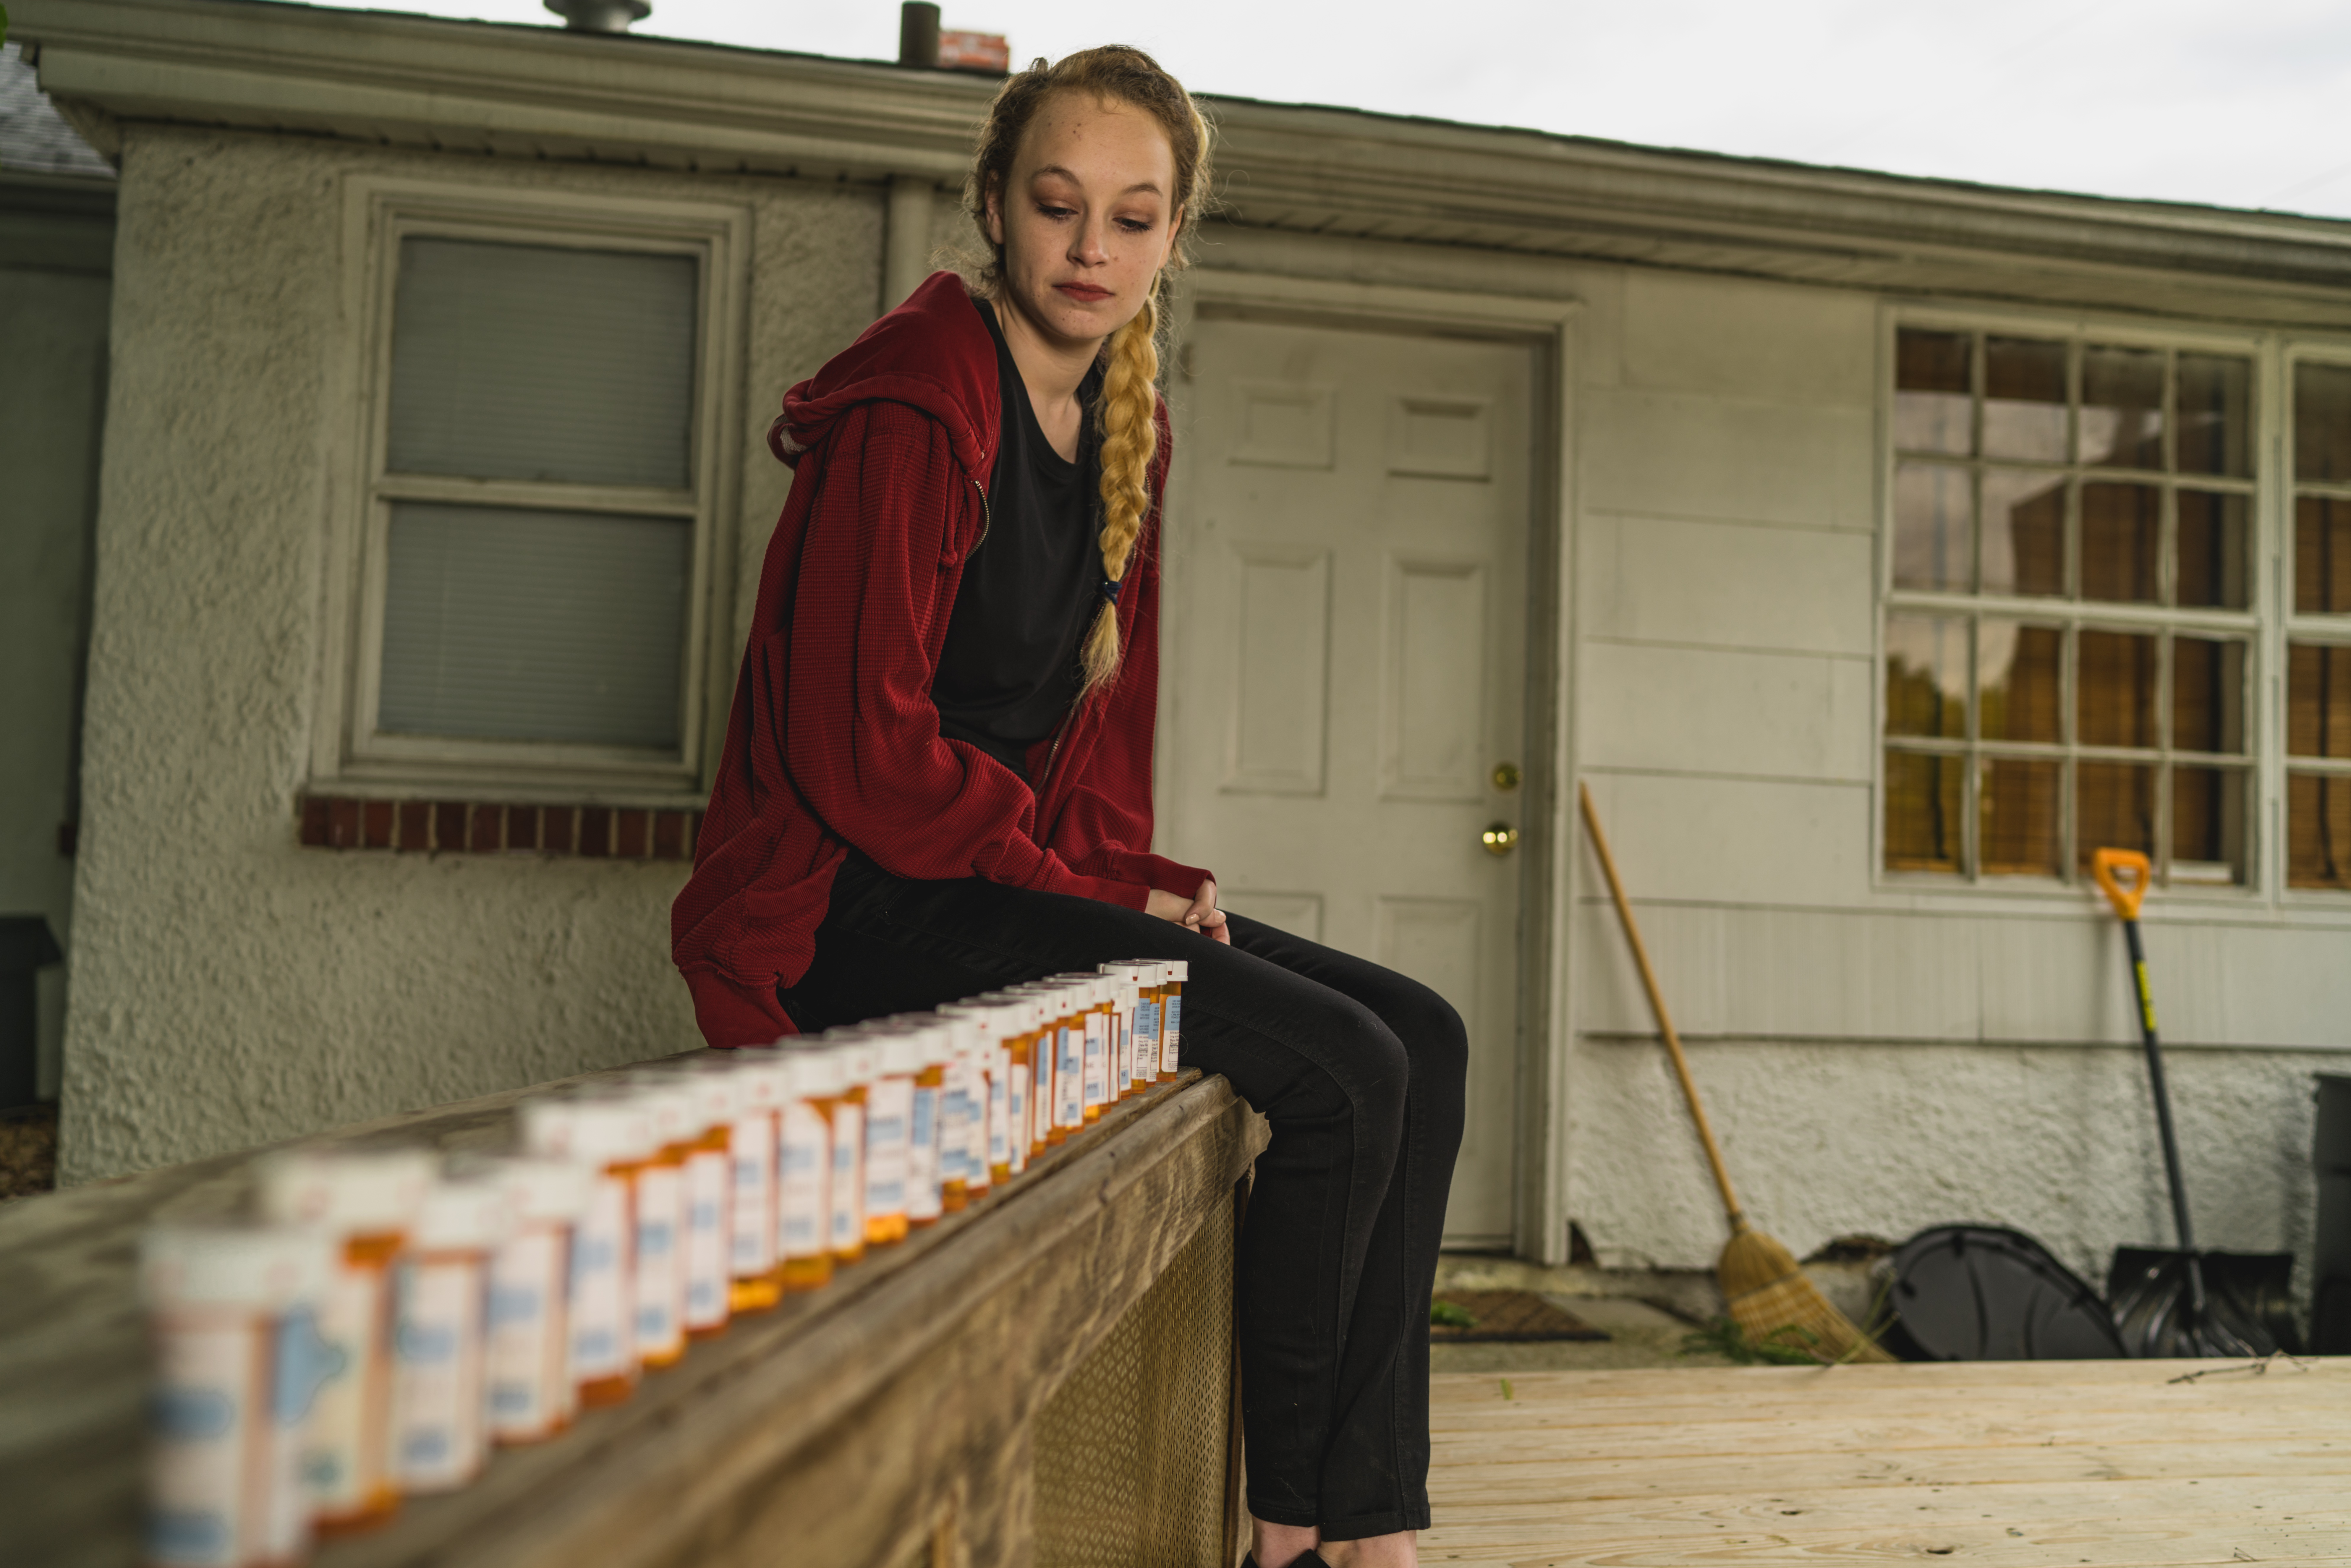 wide shot of woman on bench with medication bottles